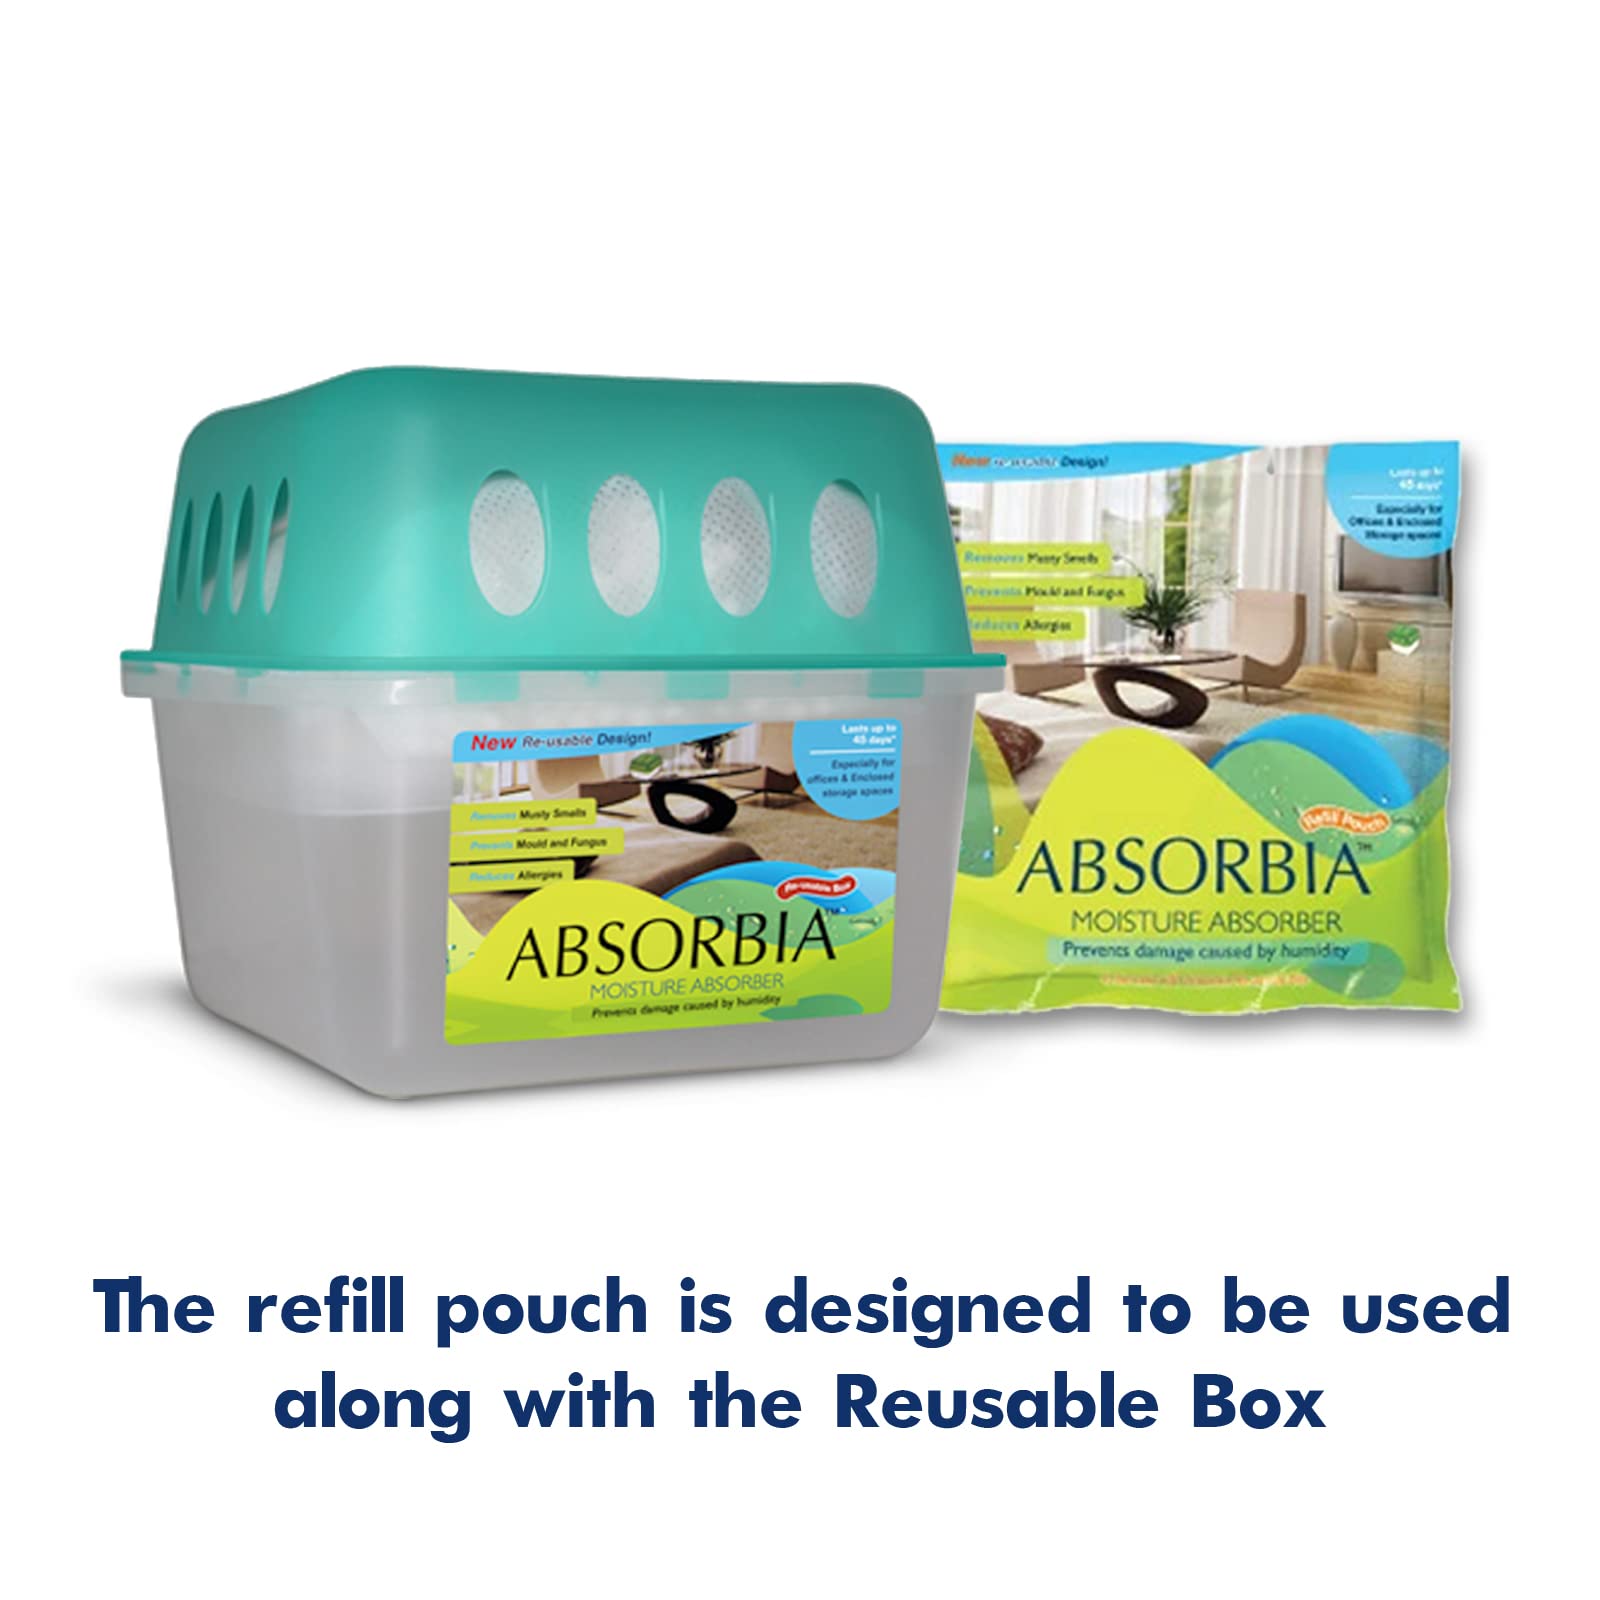 Absorbia Moisture Absorber | Absorbia Refill Pouch for Reusable Box - Pack of 6 (800ml Each) | Dehumidifier for Larger Areas Rooms| Fights Against Moisture, Mould, Fungus Musty Smells